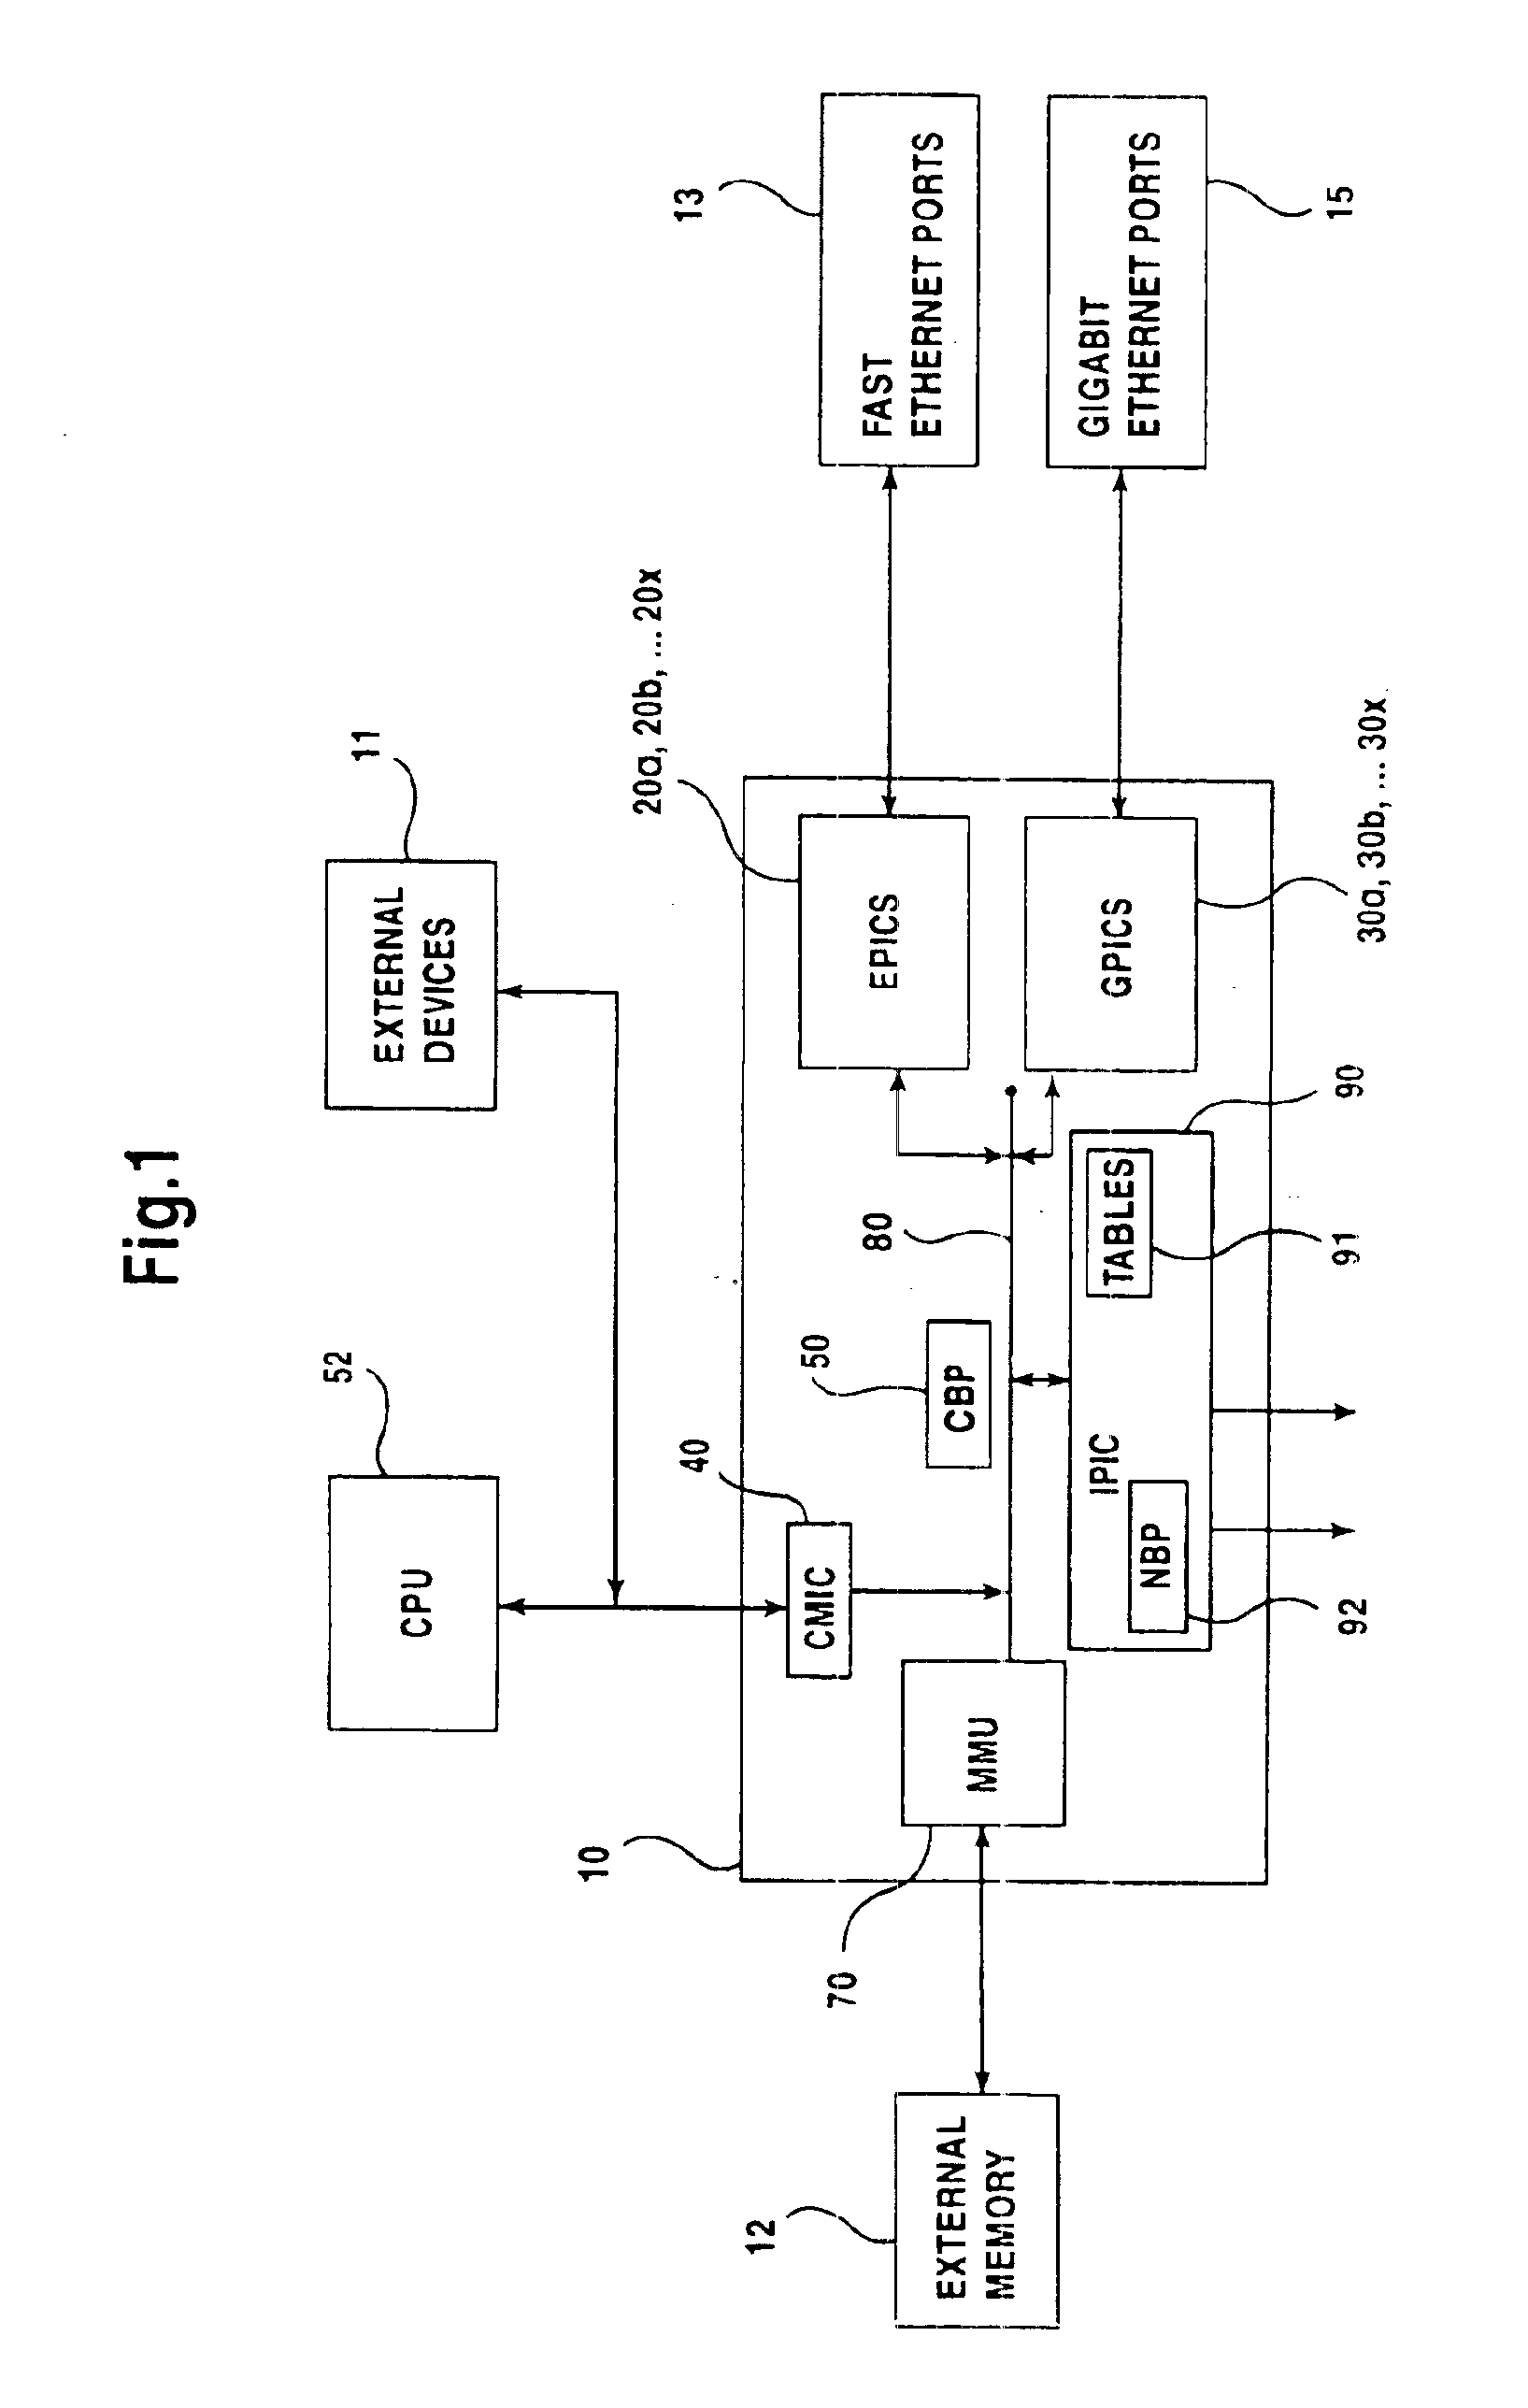 Network switch with high-speed serializing/deserializing hazard-free double data rate switching